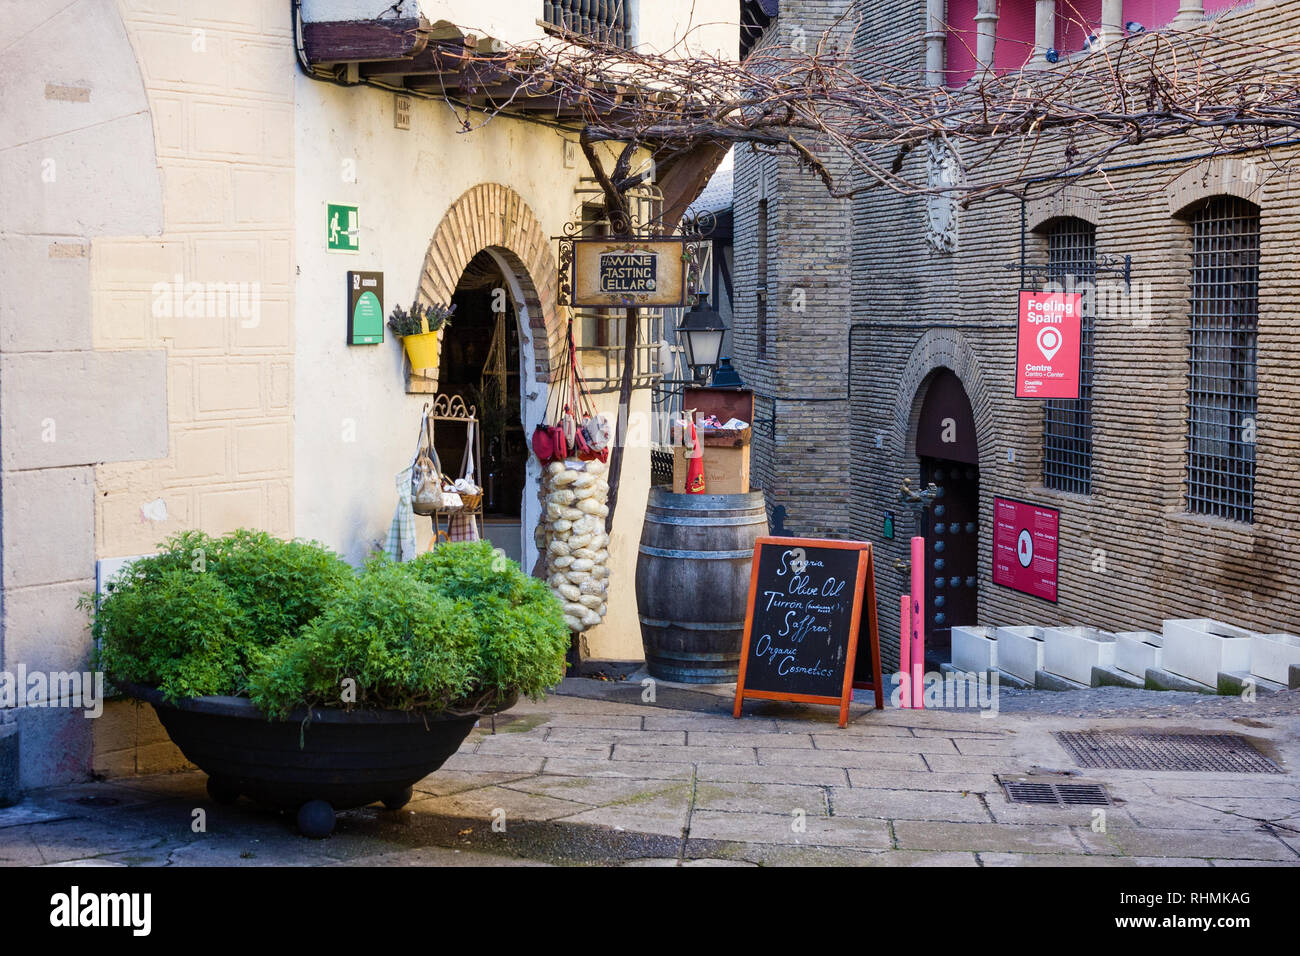 Barcelona, Spain - January 21, 2019: Territory of unique architectural complex Poble Espanyol the Spanish village, where copies of known and beautiful Stock Photo